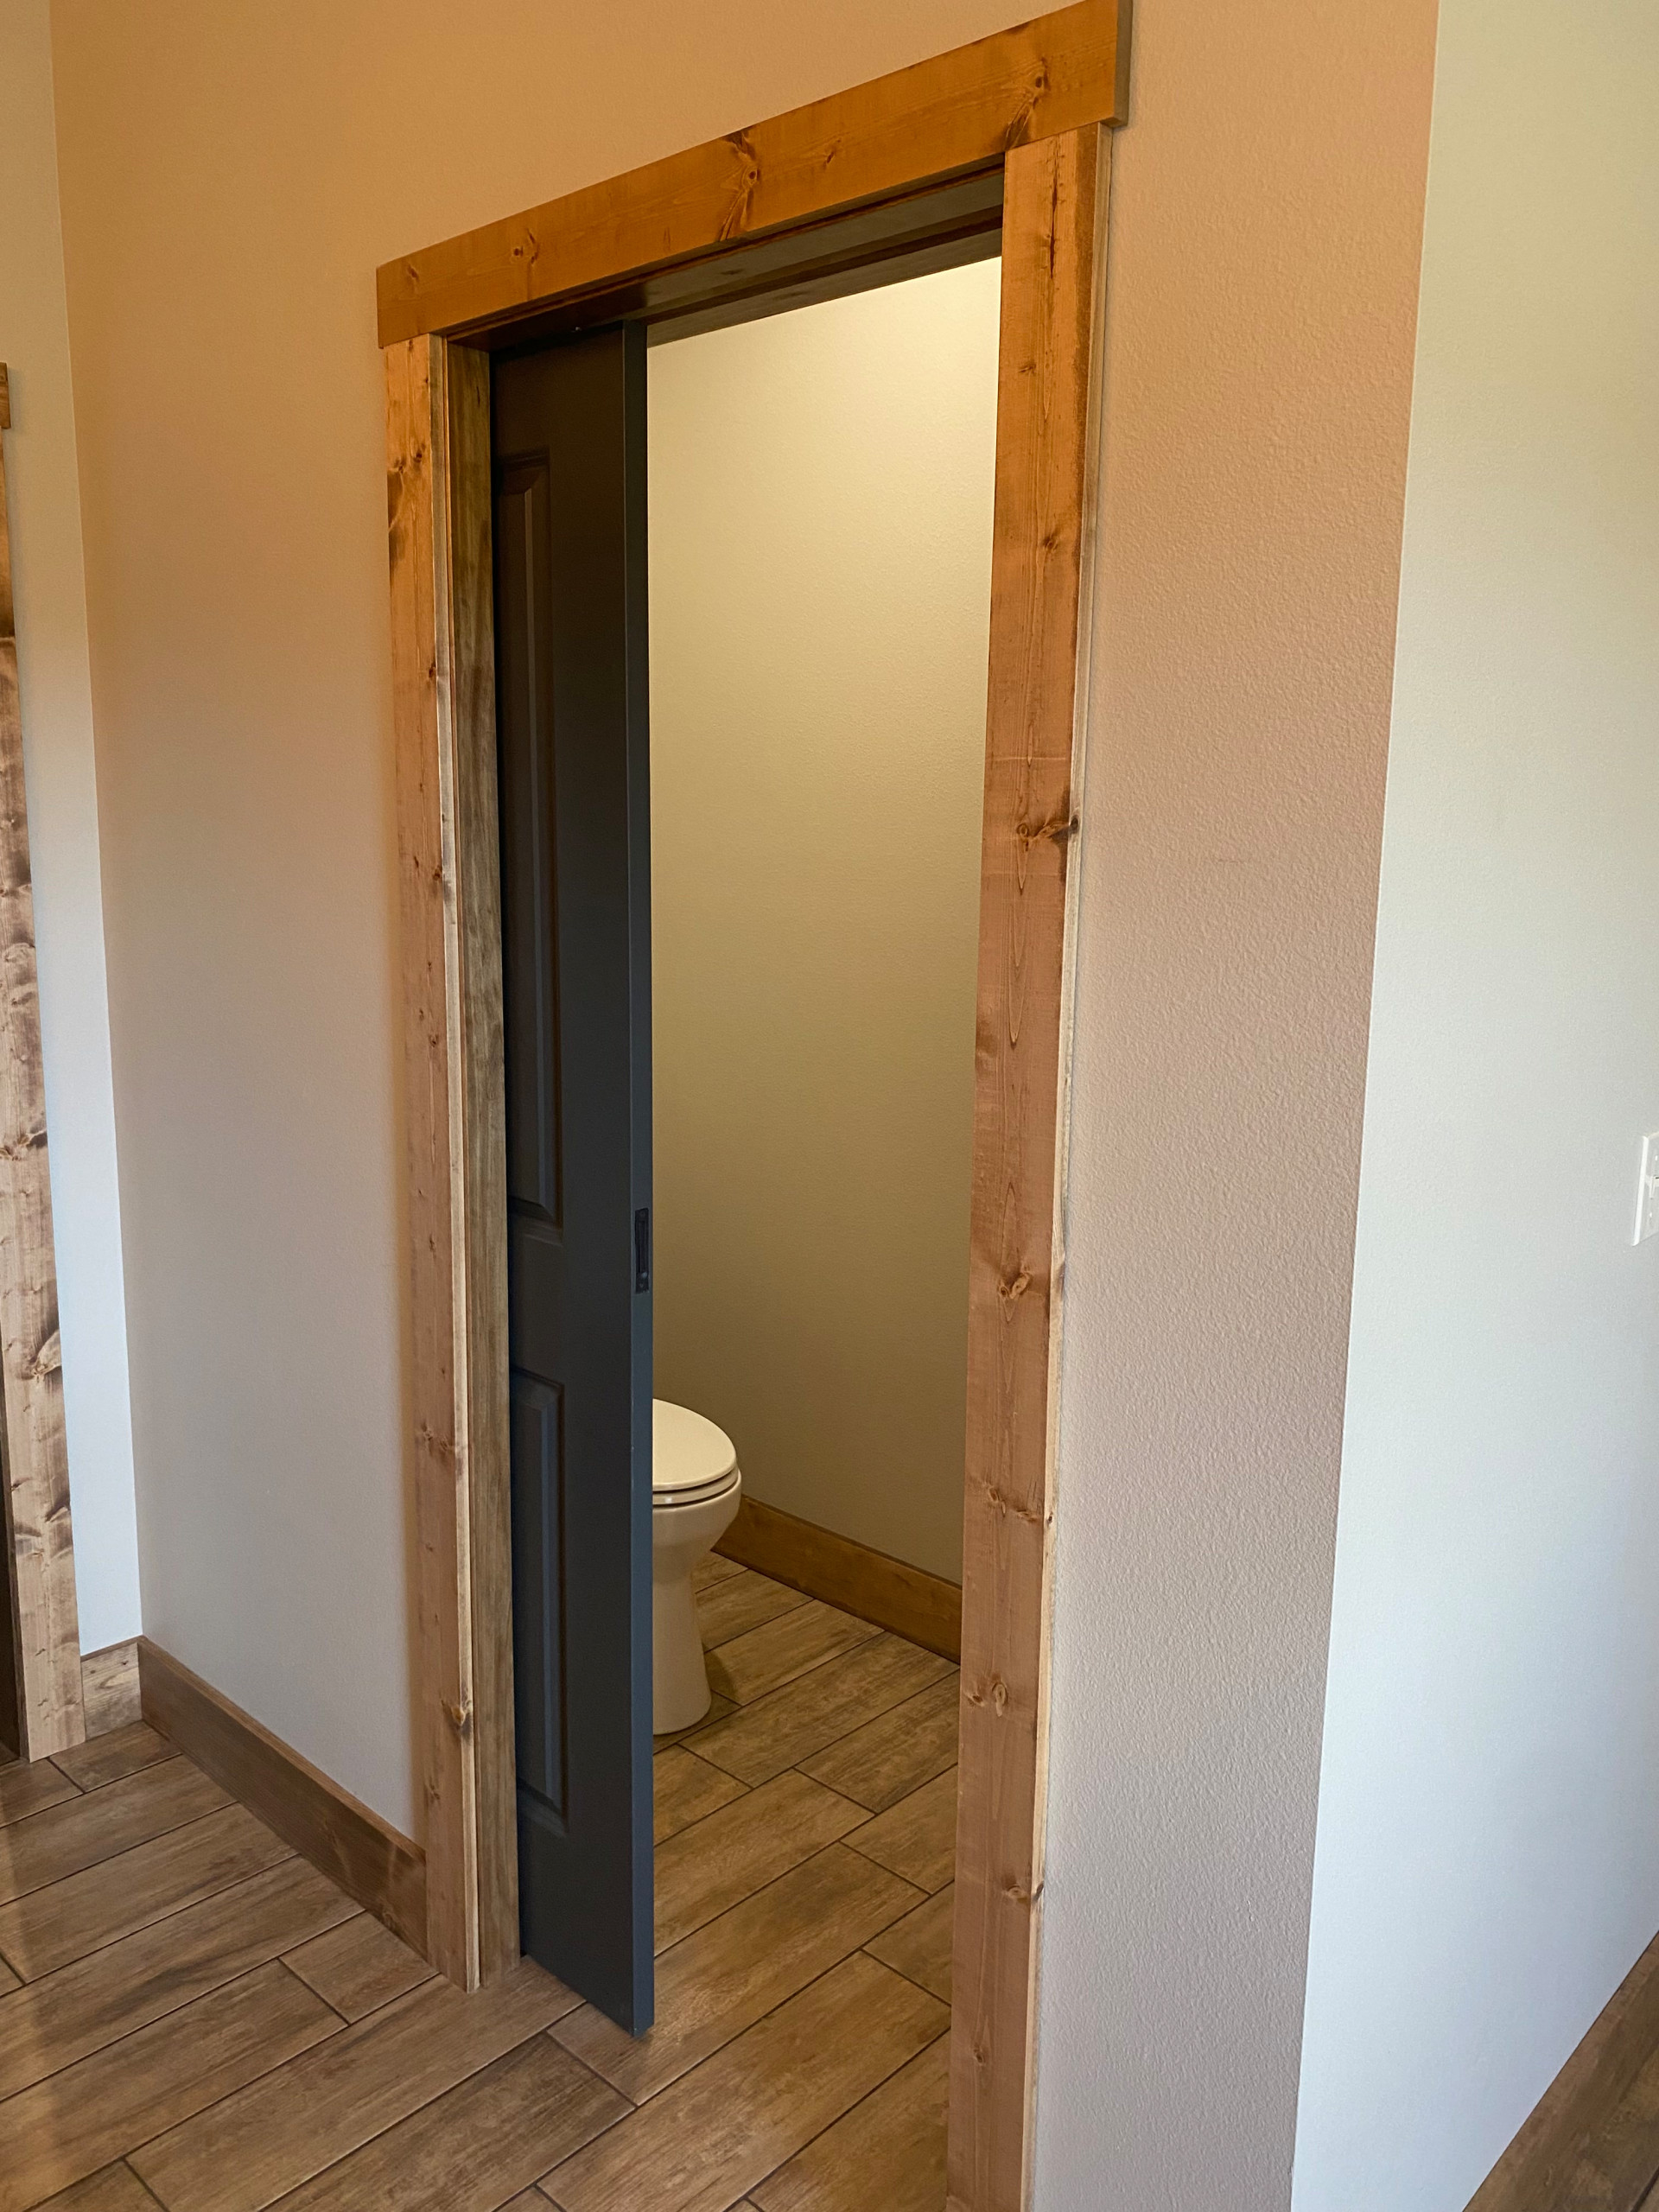 Private toilet room with painted pocket door